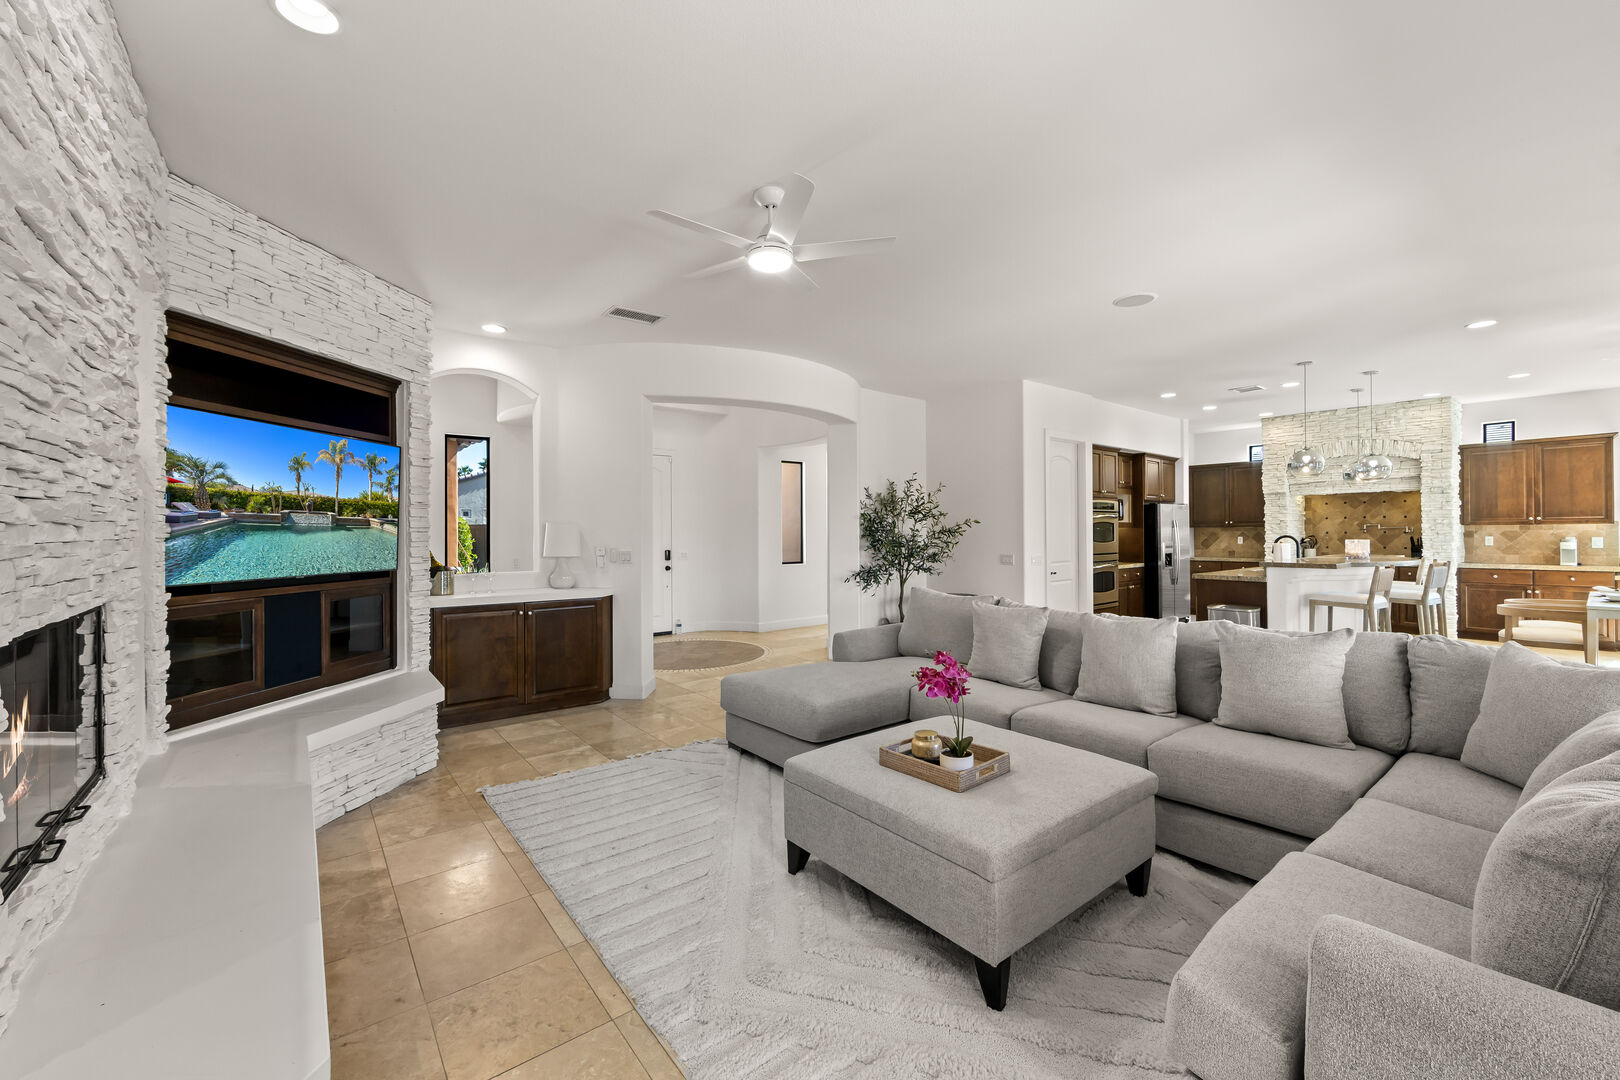 In the living room, relax in front of a 65-inch Samsung Smart television and a natural gas fireplace.